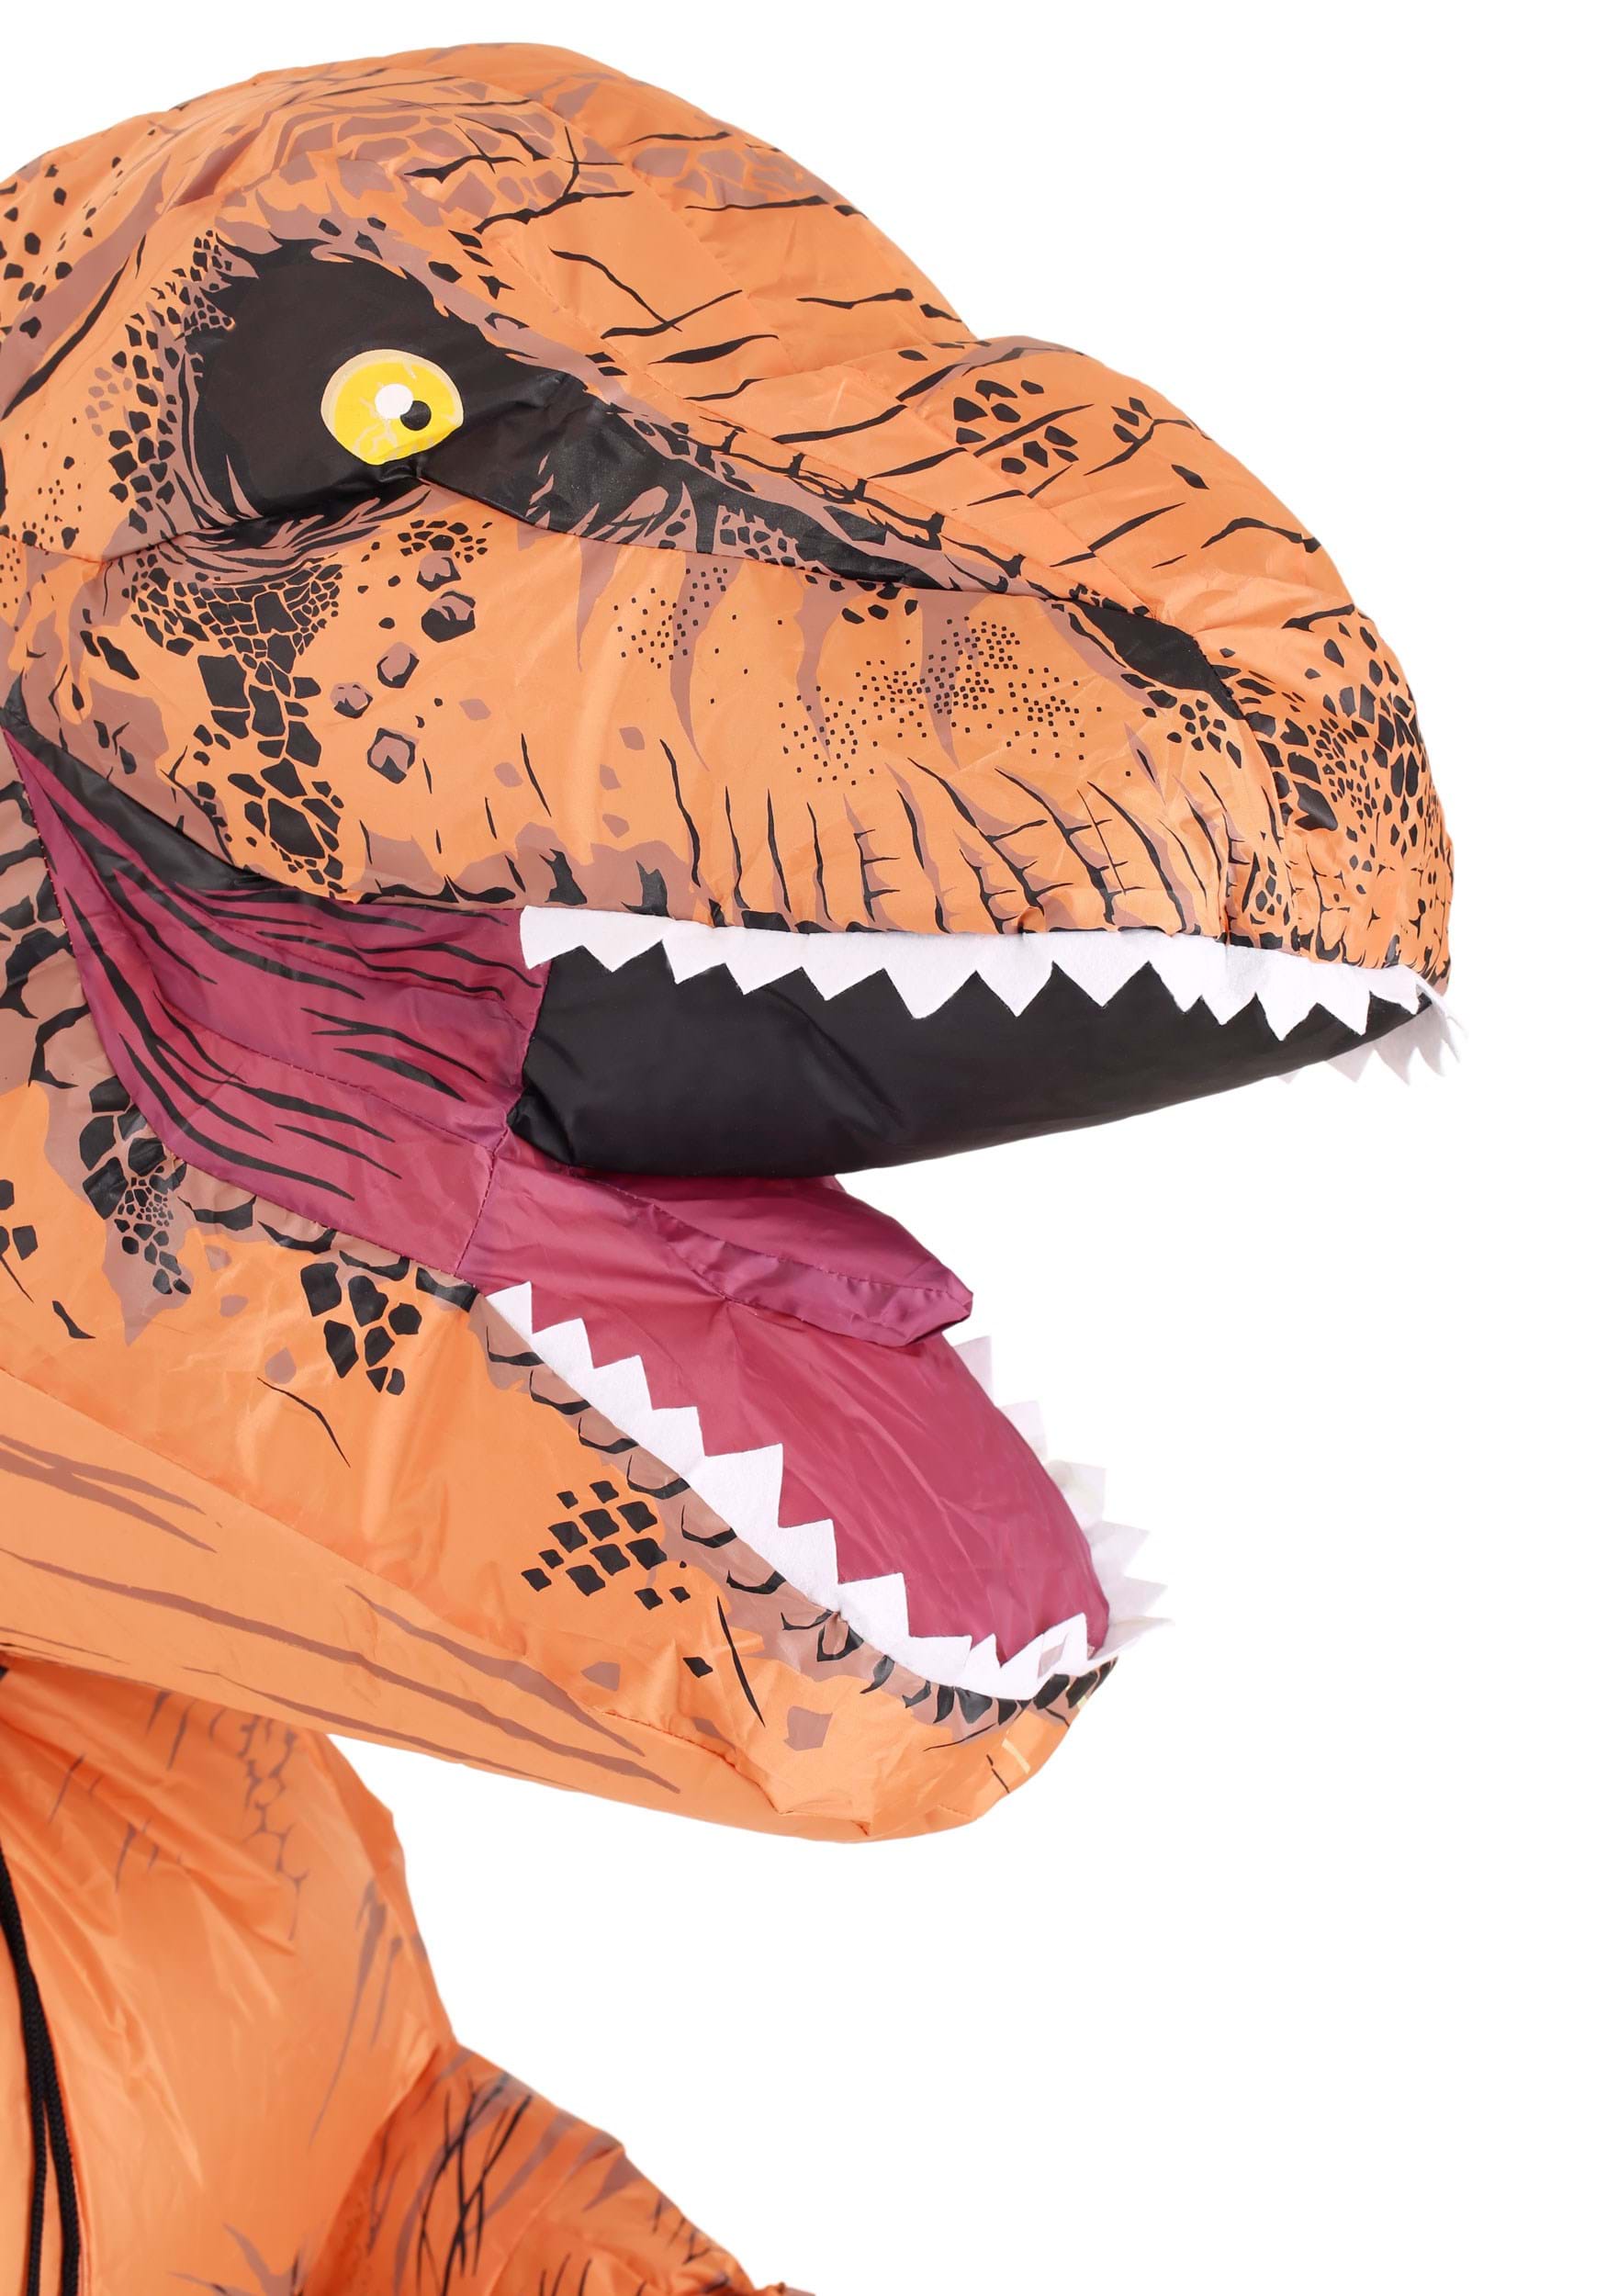 NEW Inflatable T-Rex Dinosaur Halloween Costume Child Up To 5'1" Morphsuits 